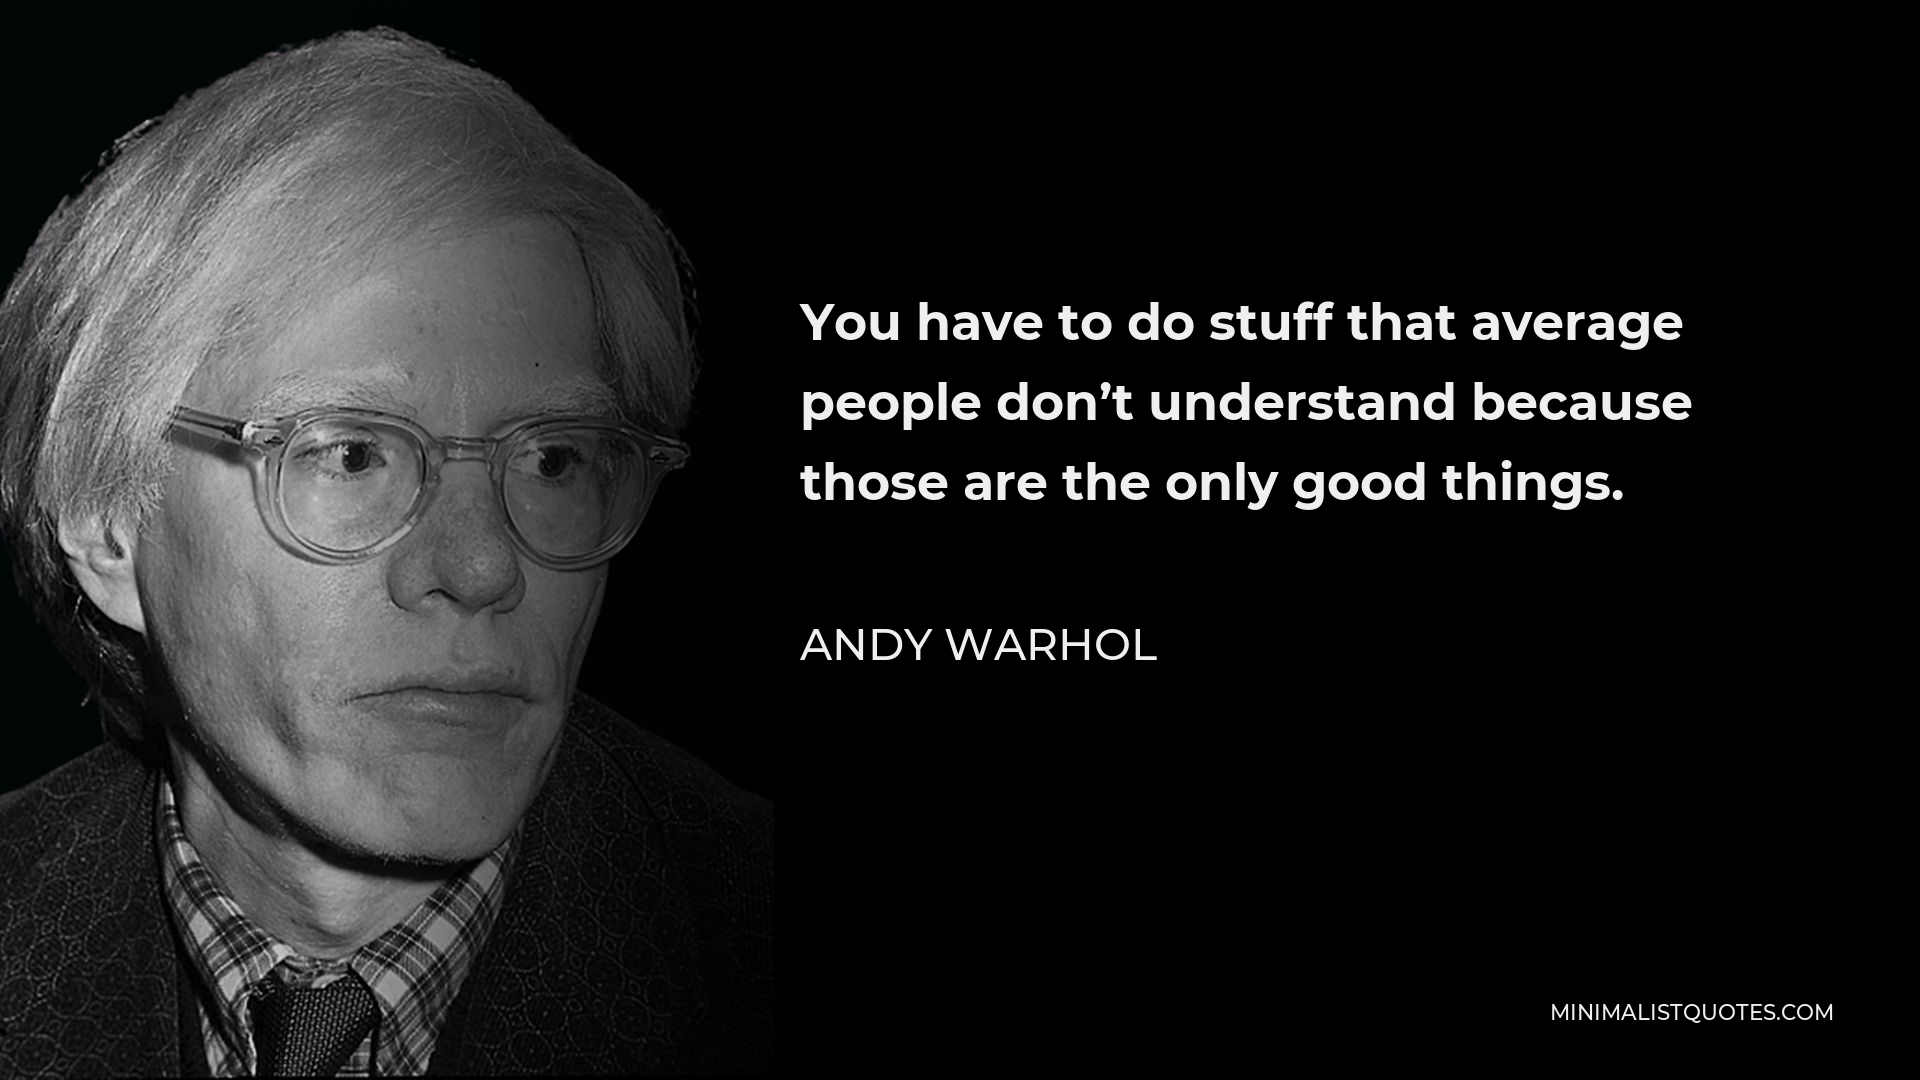 Andy Warhol Quote - You have to do stuff that average people don’t understand because those are the only good things.